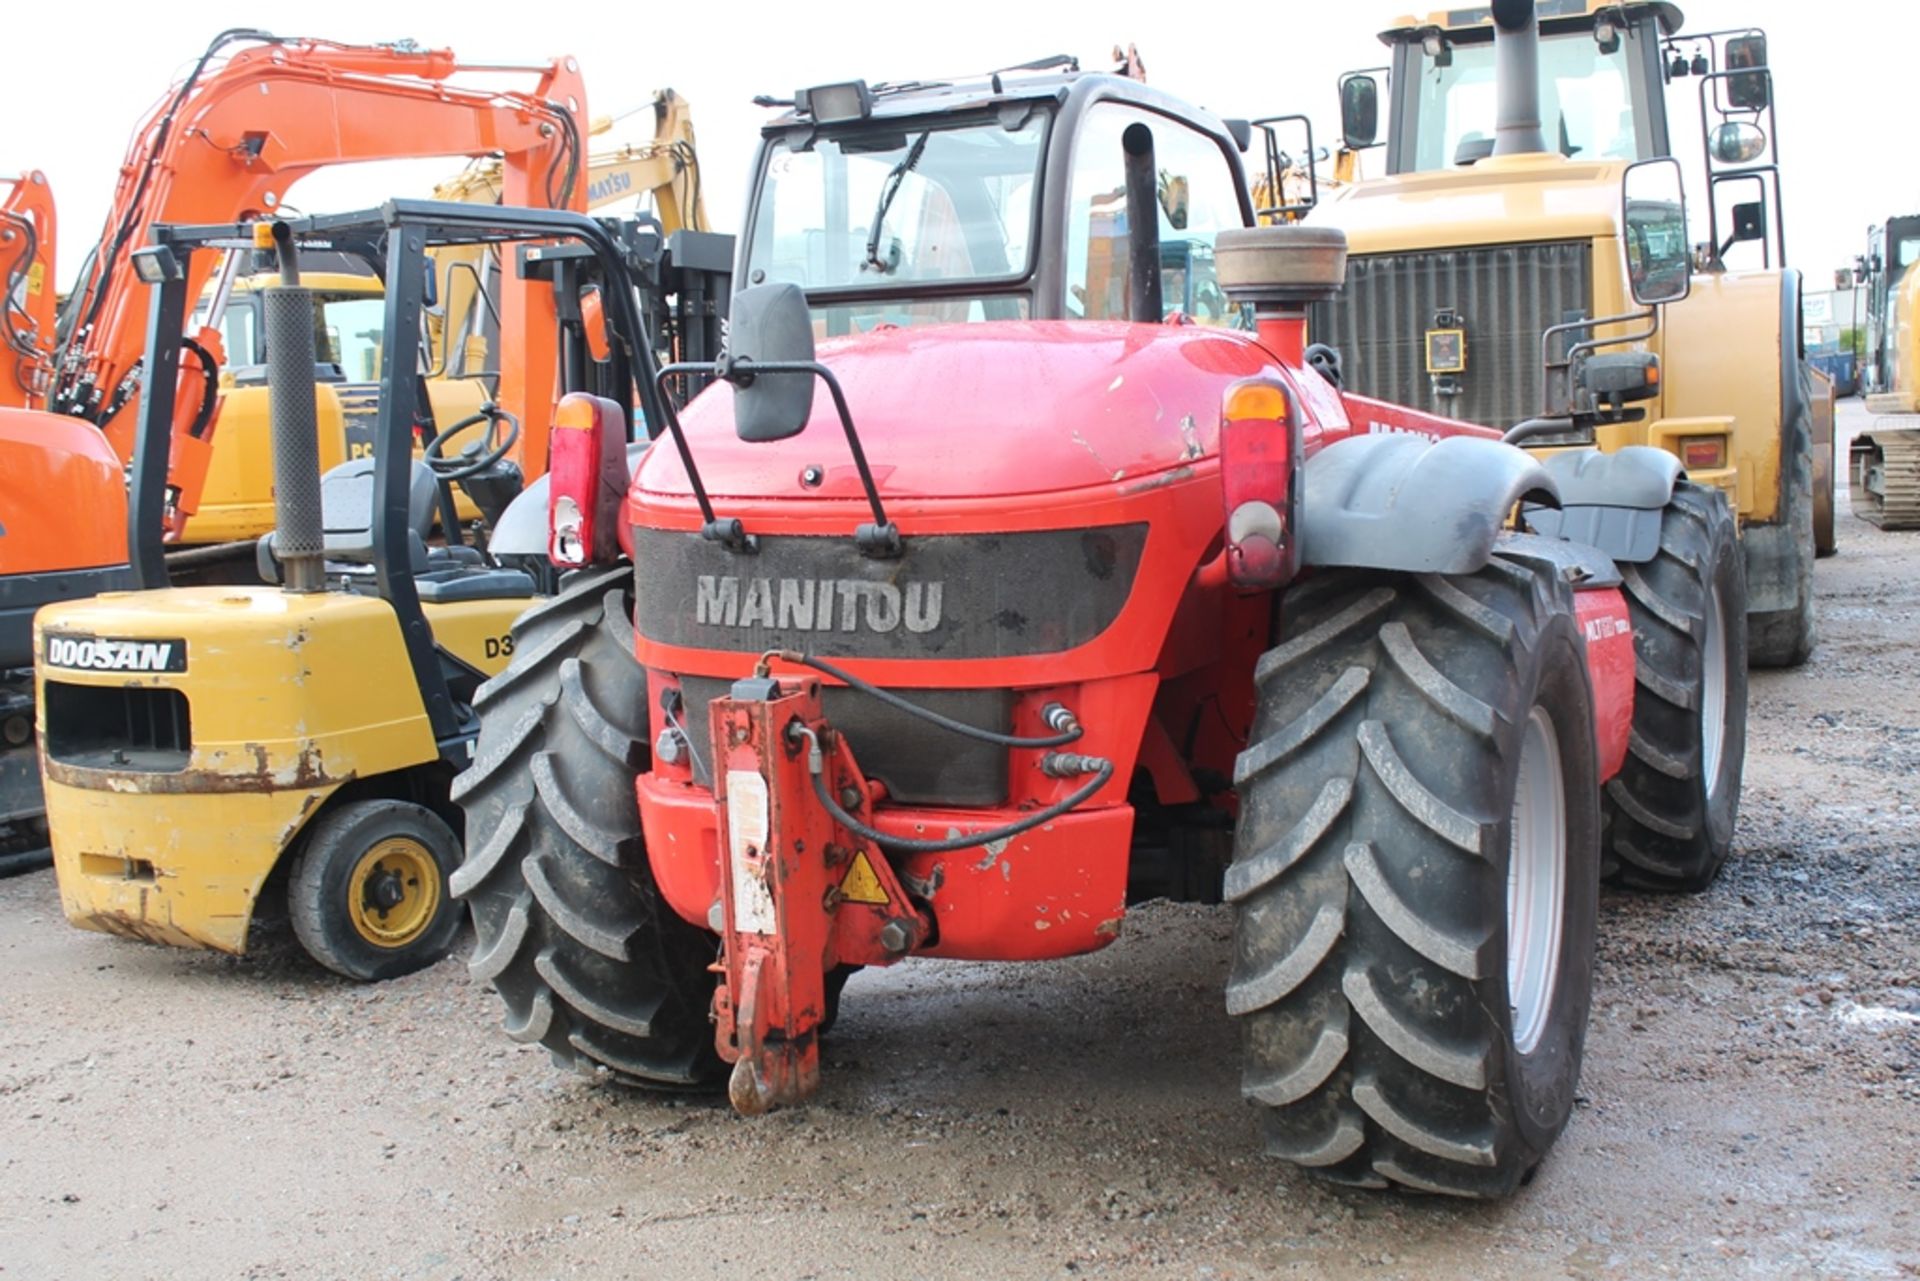 Manitou Unknown - 4400cc Truck - Image 3 of 4